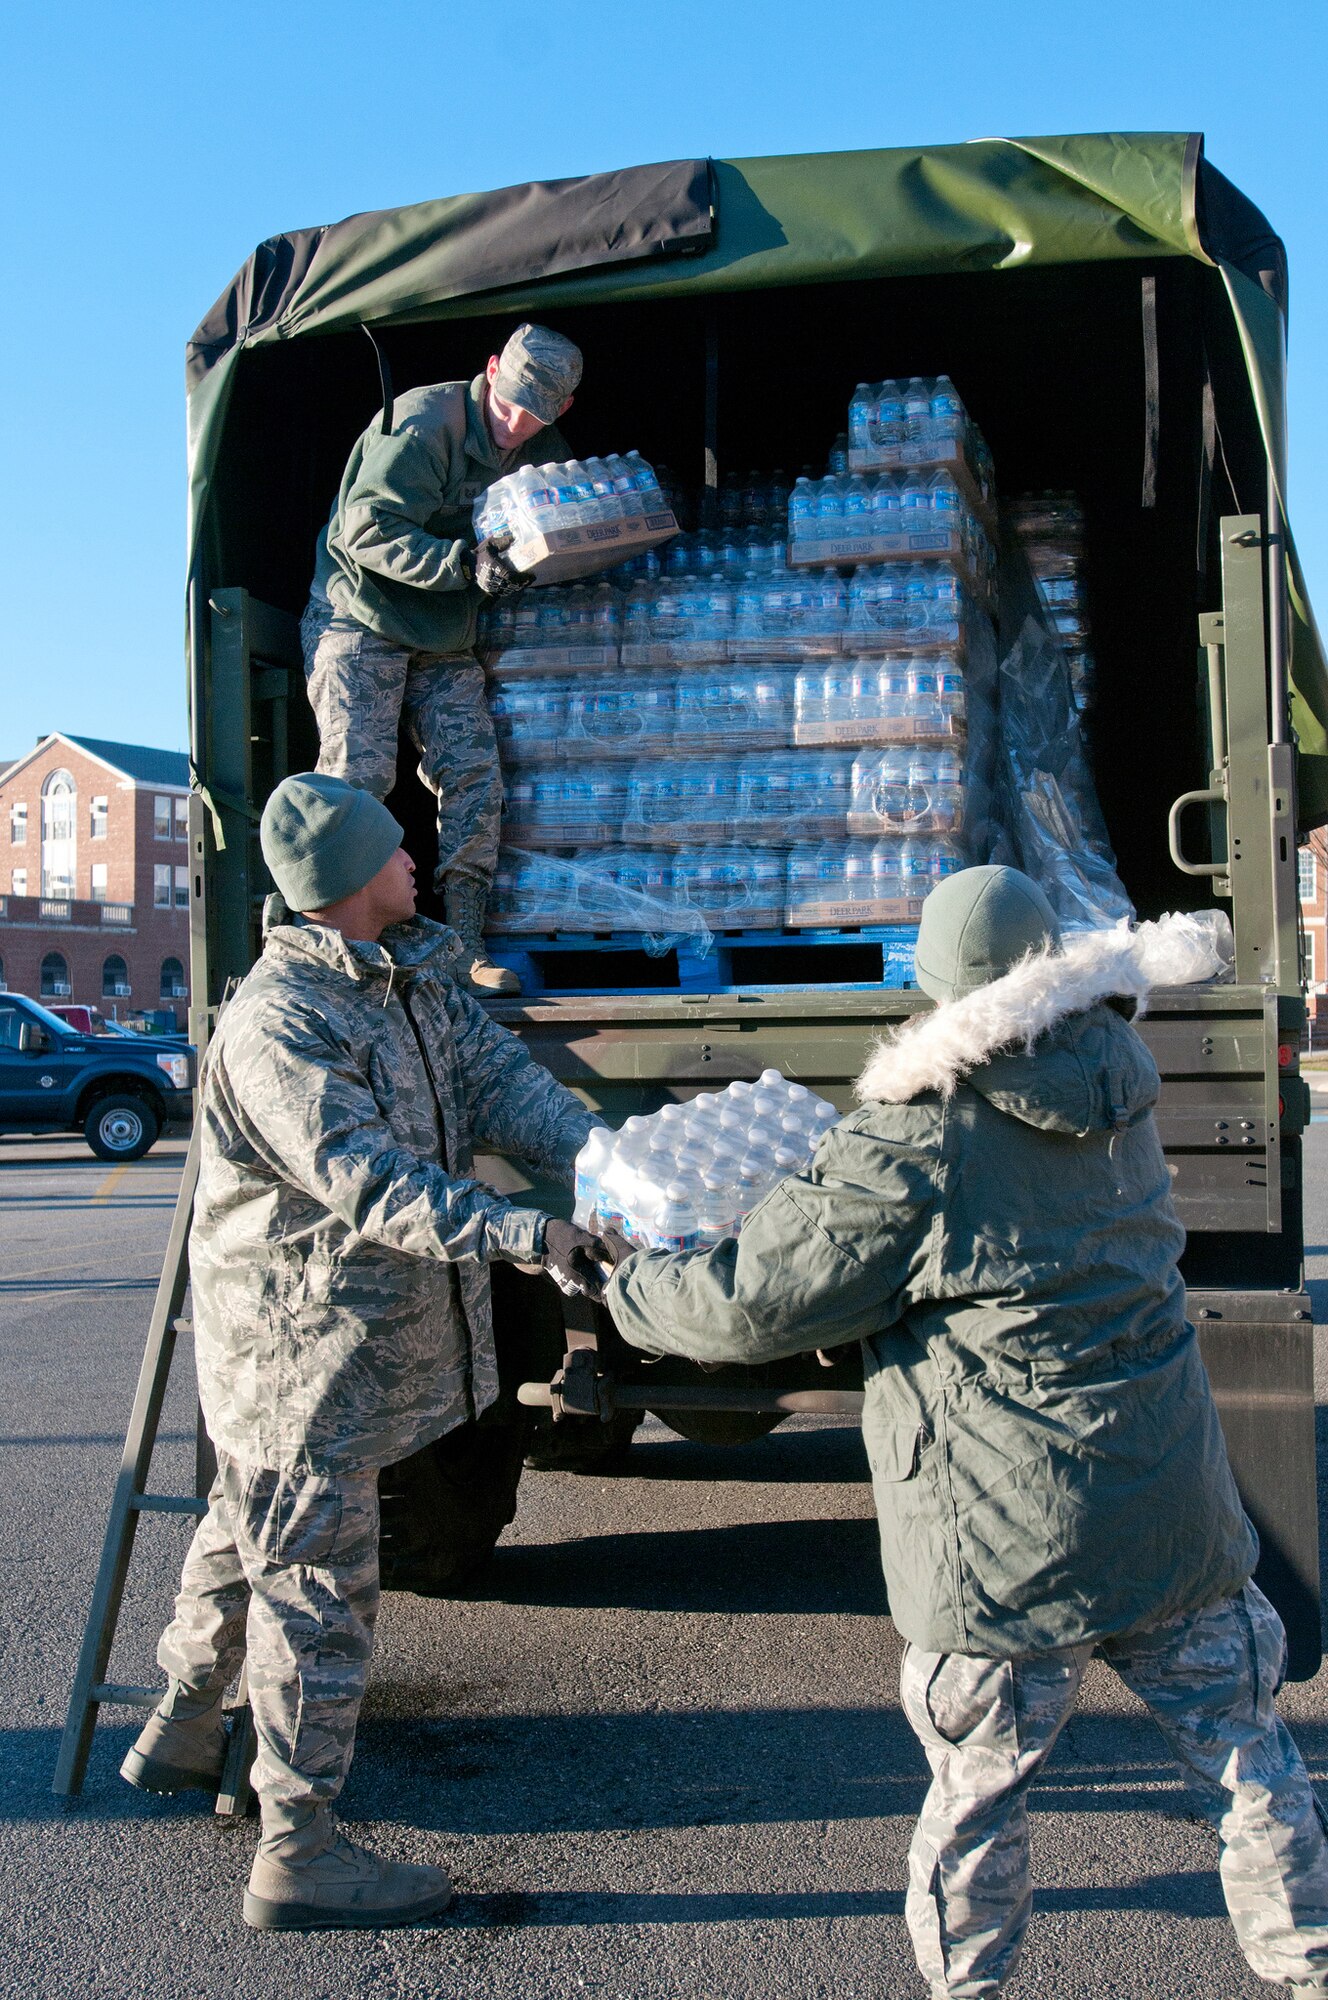 Members of the Kentucky Air National Guard’s 123rd Force Support Squadron unload food and water at McKinley Technology High School in Washington, D.C., on Jan. 18, 2013. They were among nine Kentucky Air Guardsmen who deployed to the nation’s capital to provide food and lodging for National Guard members supporting the inauguration of President Barack Obama. (Kentucky Air National Guard photo by Senior Airman Vicky Spesard)